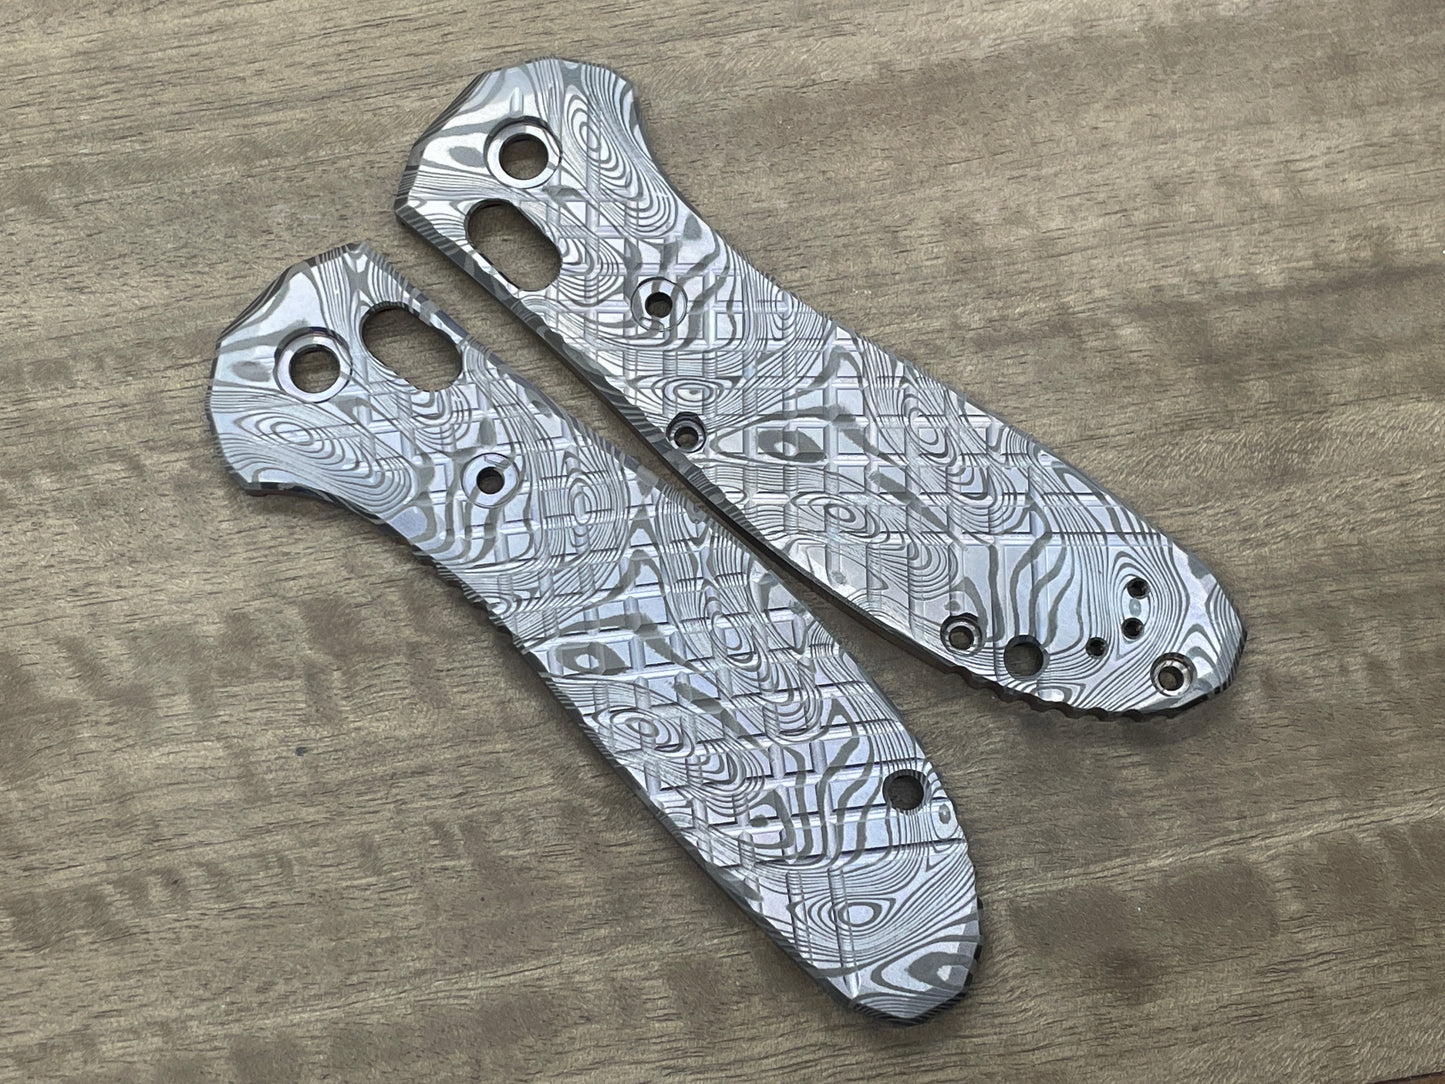 FRAG milled Dama FISH Flamed Titanium Scales for Benchmade GRIPTILIAN 551 & 550